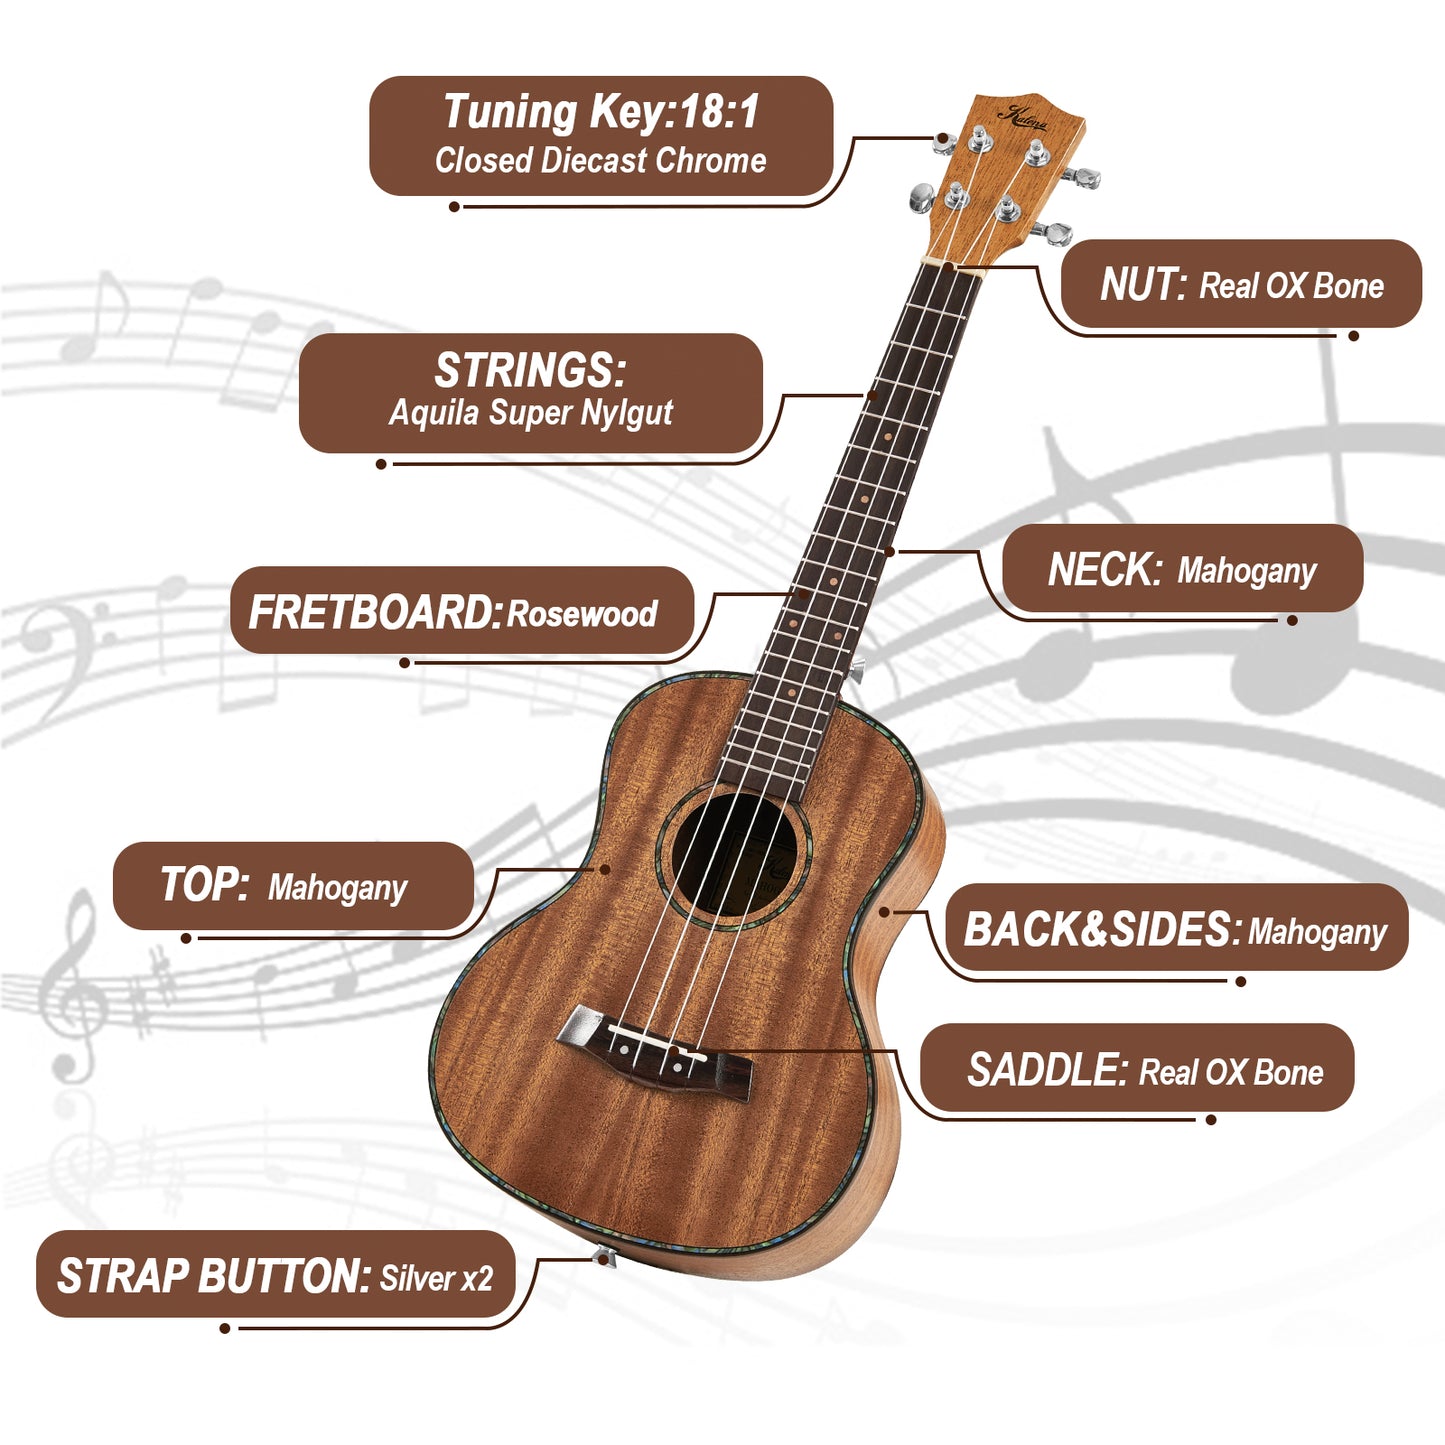 Kalena LM series Tenor Mahogany Ukulele with Celluloid Binding Traditional complete set: Strings, Picks, Strap, Digital Tuner, Padded Case, Starter Guide